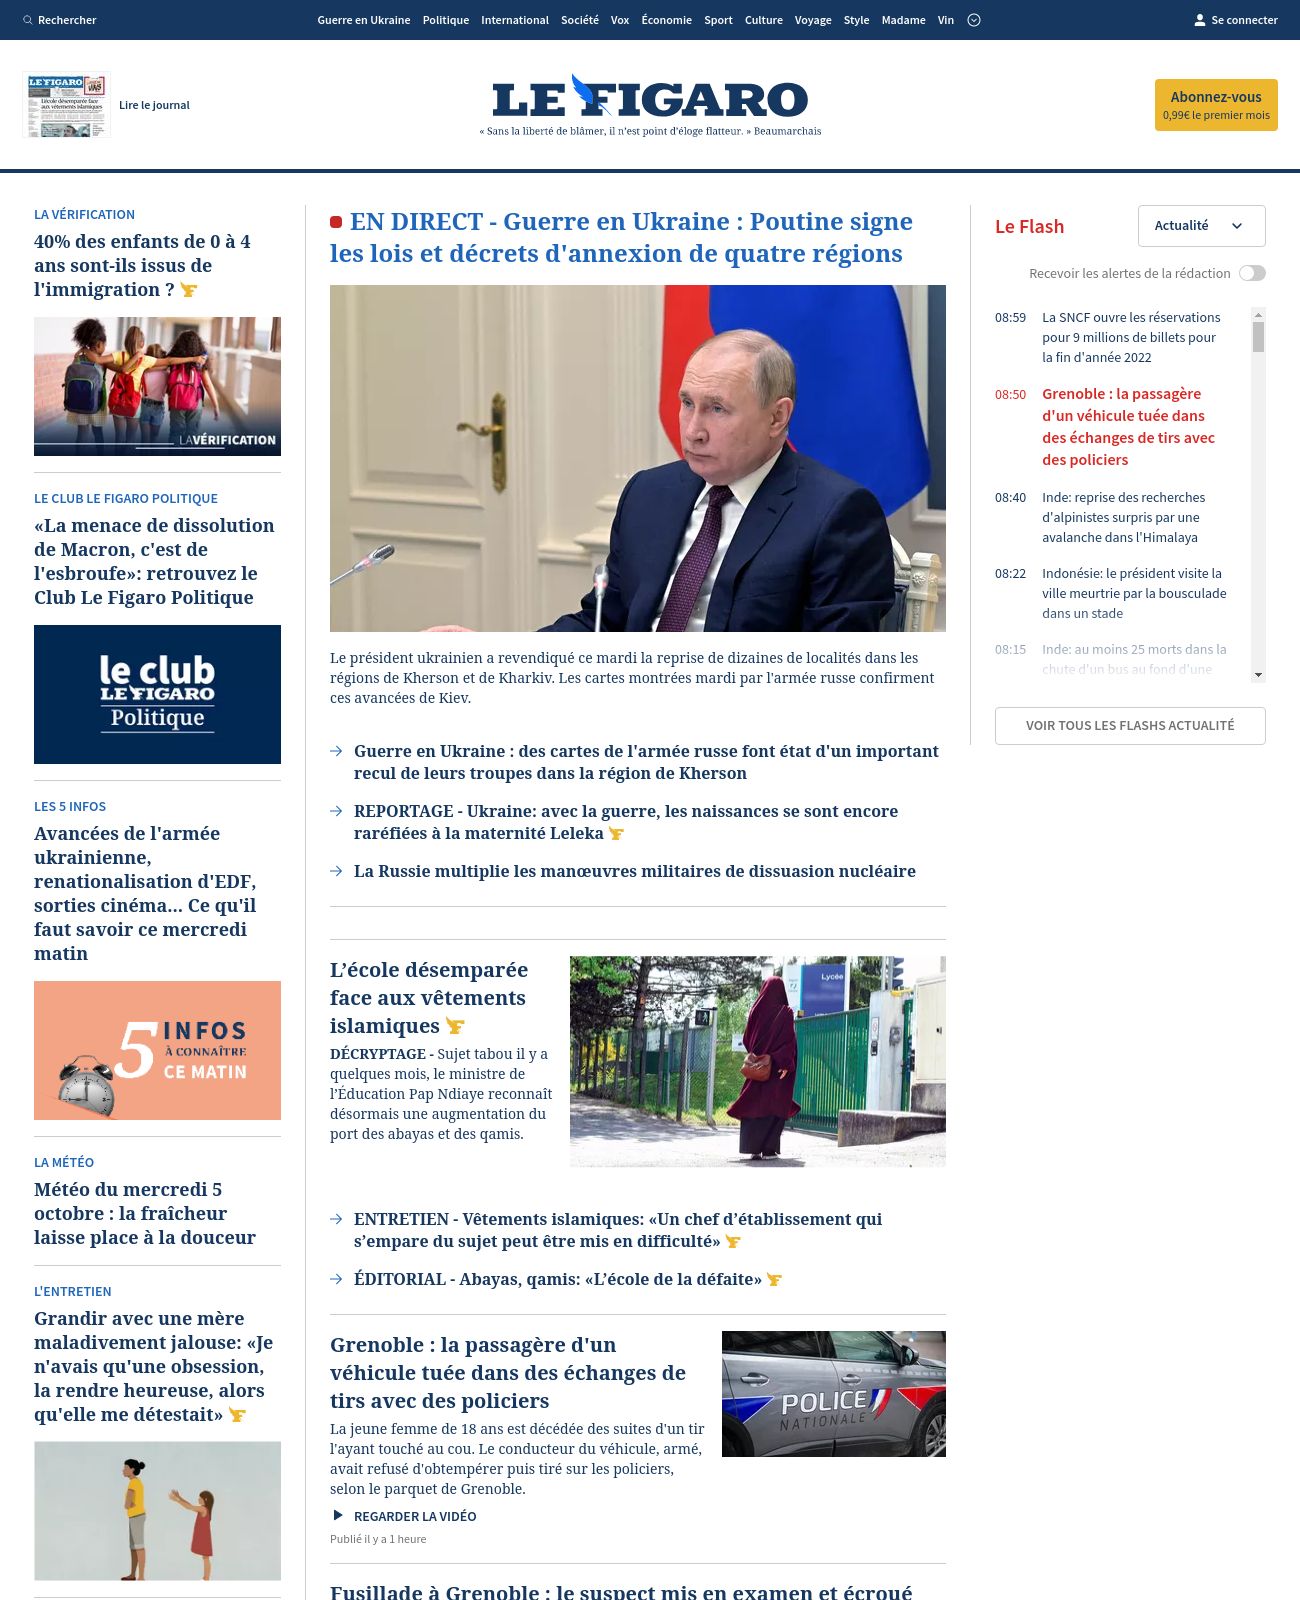 Le Figaro at 2022-10-05 10:18:55+02:00 local time